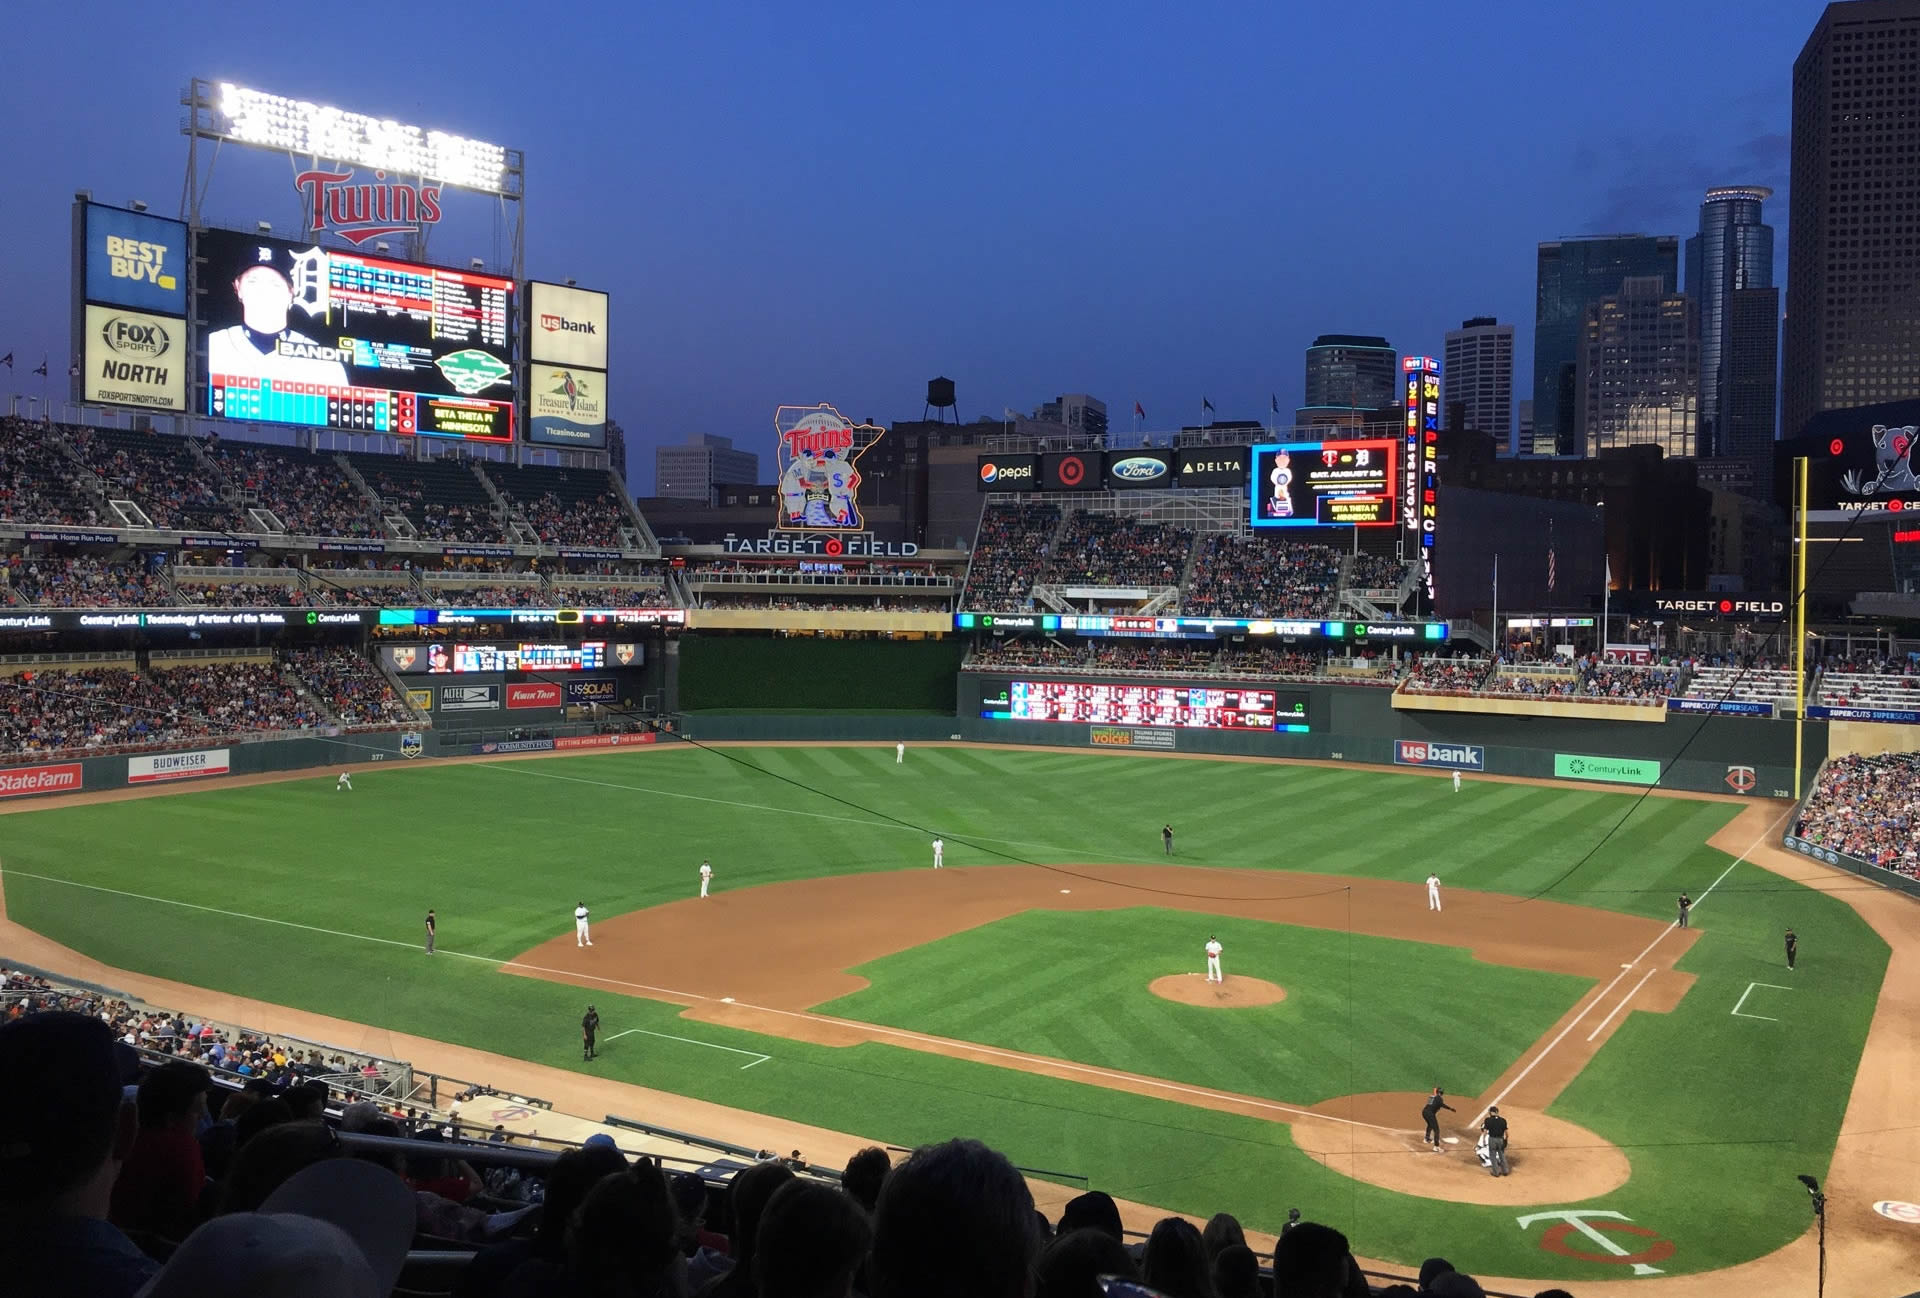 section k, row 11 seat view  - target field